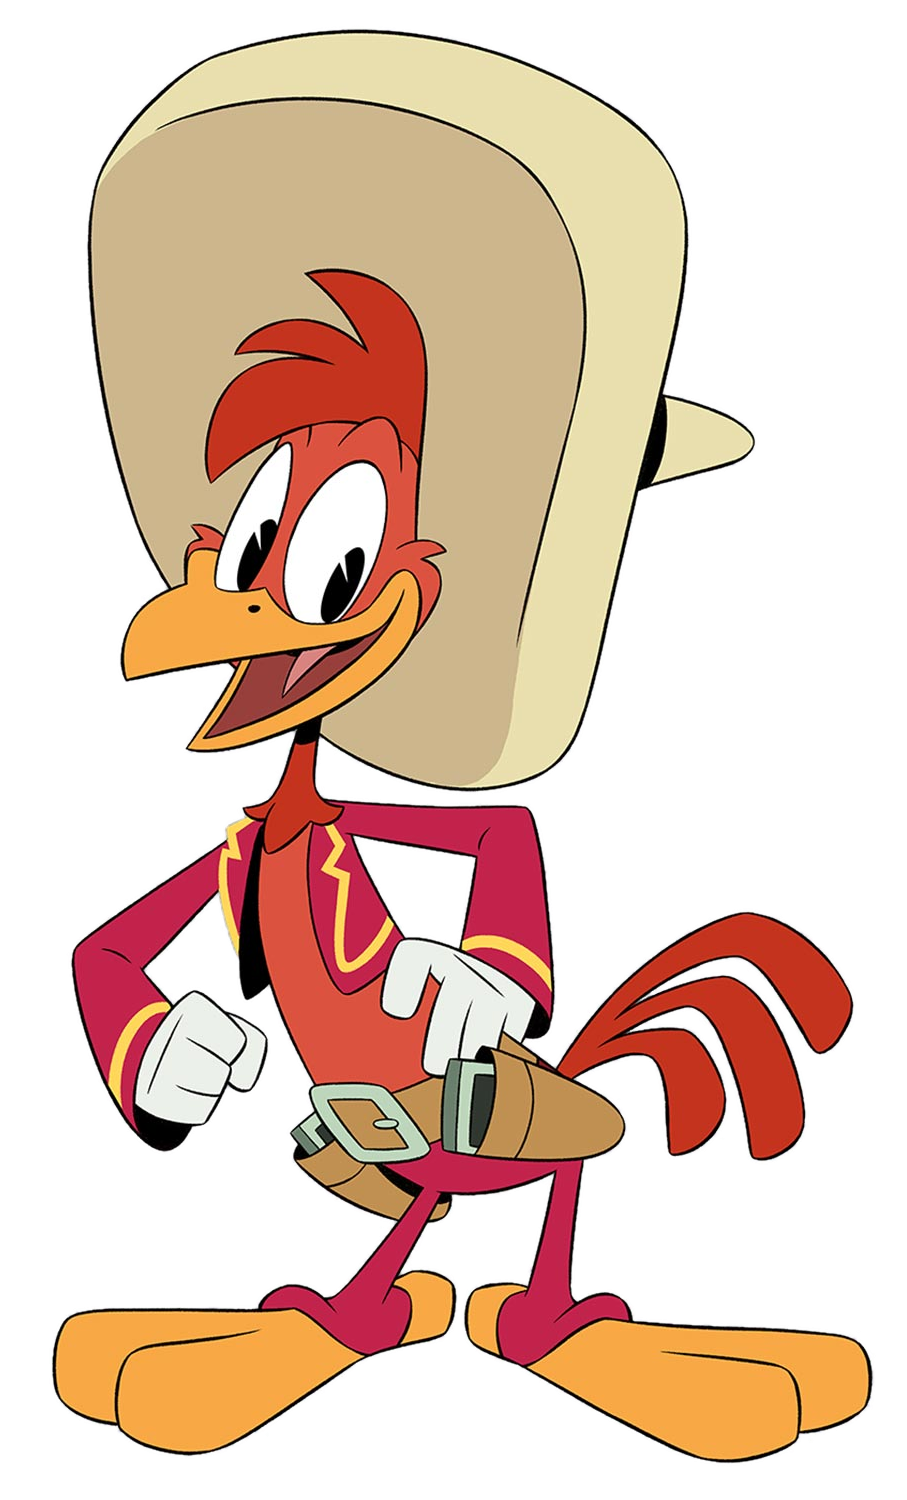 Image Ducktales 2017 Panchitopng Disney Wiki Fandom Powered By Wikia